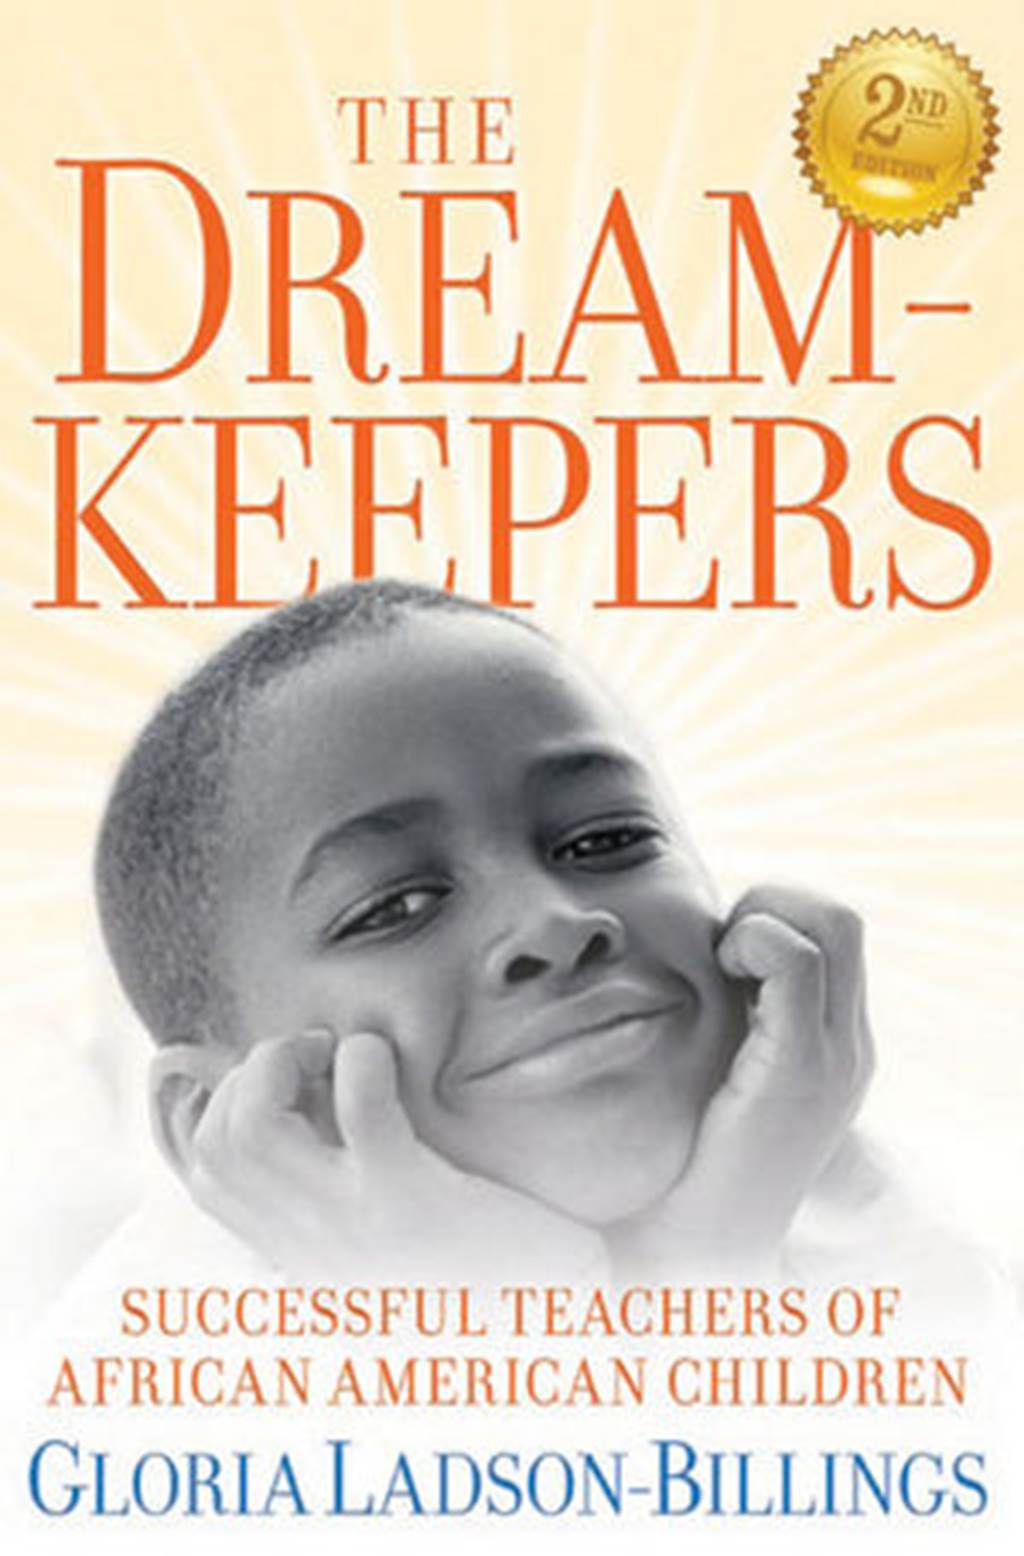 The Dream-Keepers book cover